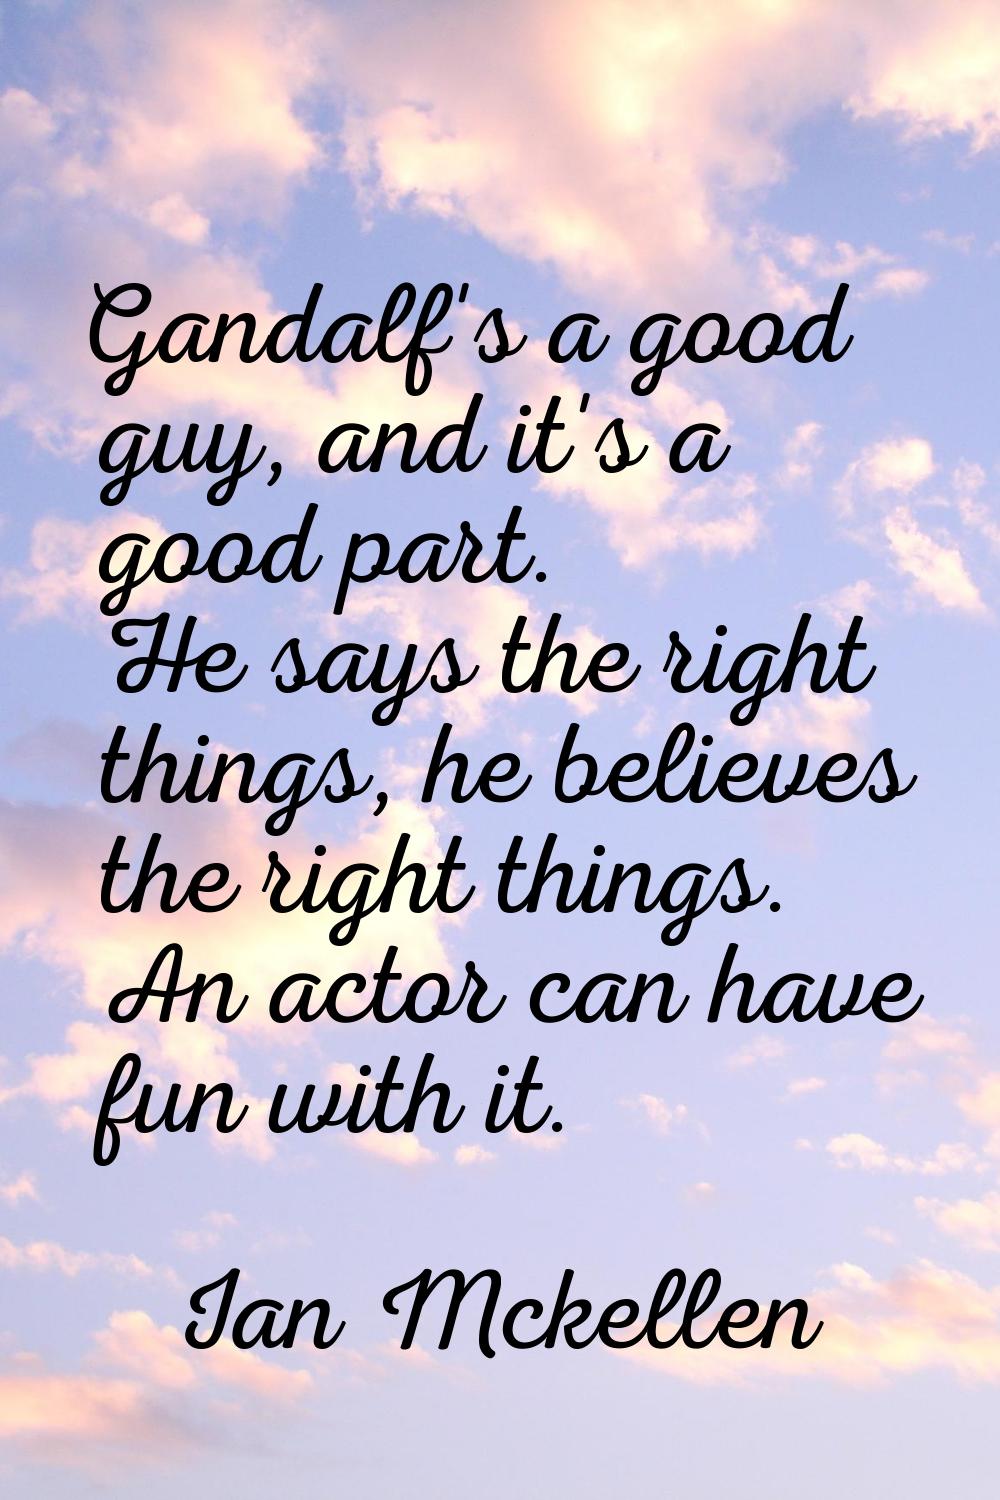 Gandalf's a good guy, and it's a good part. He says the right things, he believes the right things.